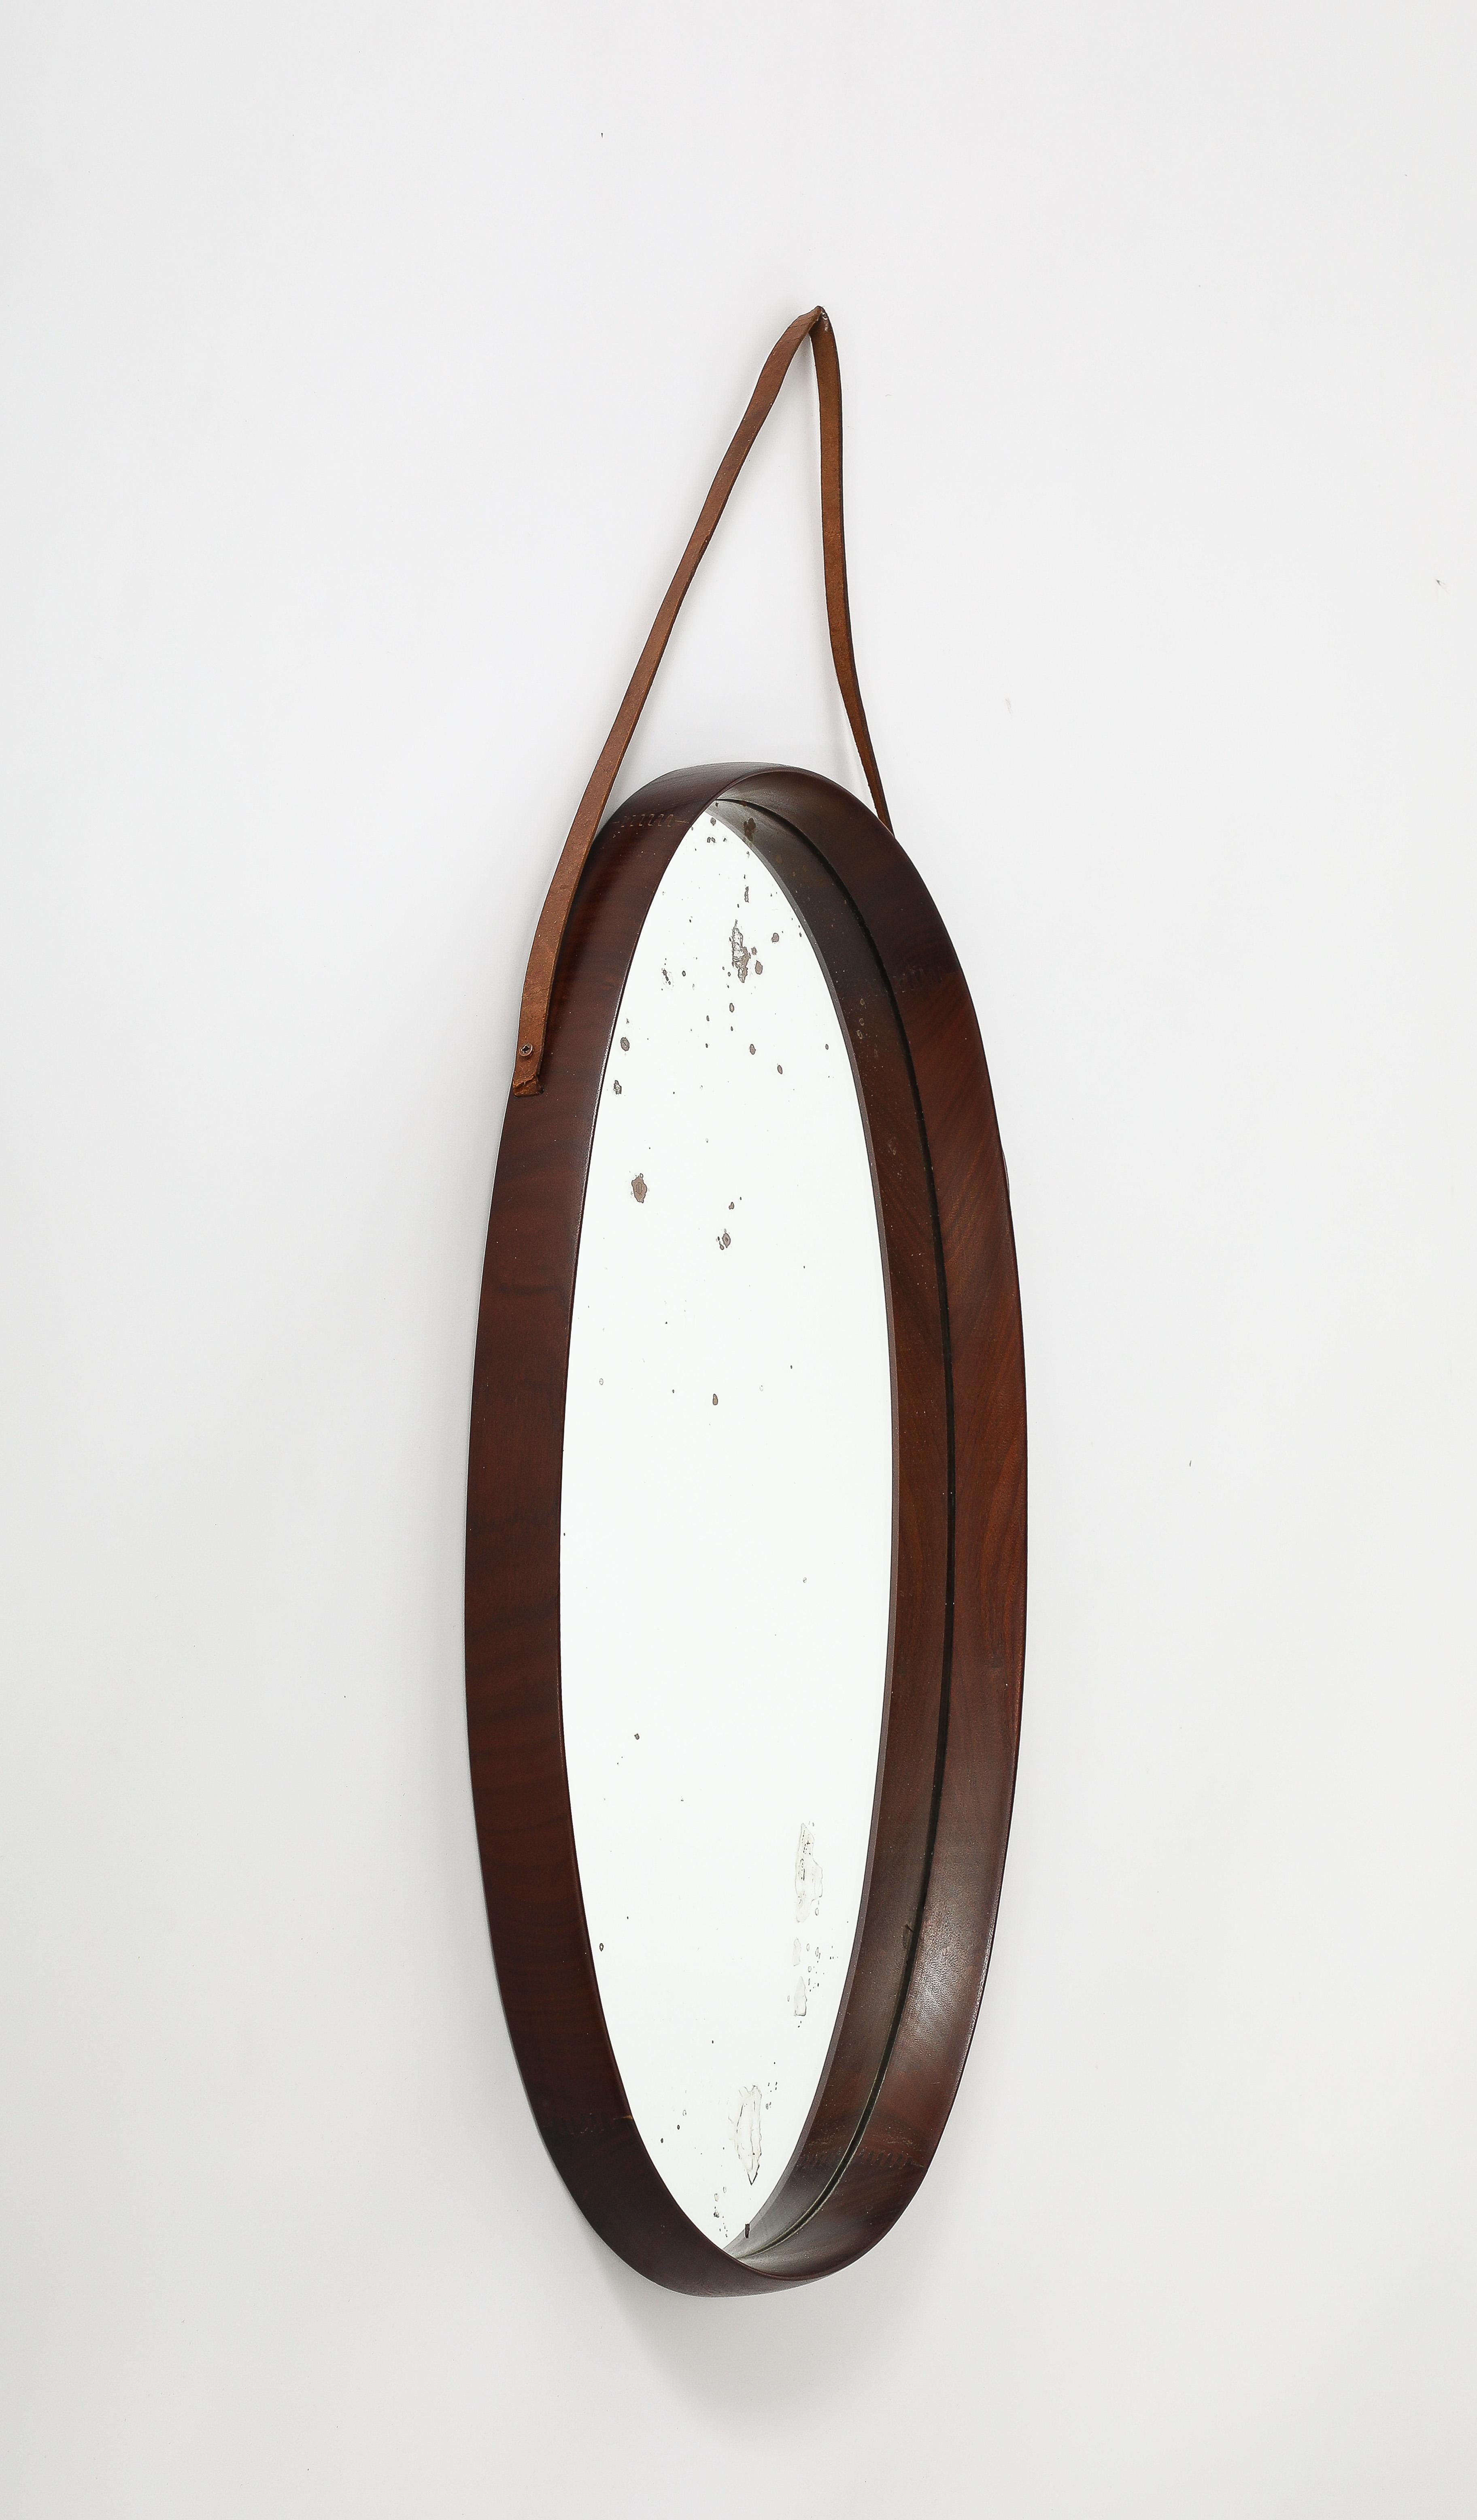 An Italian oval teak wall mirror with leather strap.  A very simple and organic mid-century design.
Italy, circa 1950 
Size: 27 1/2